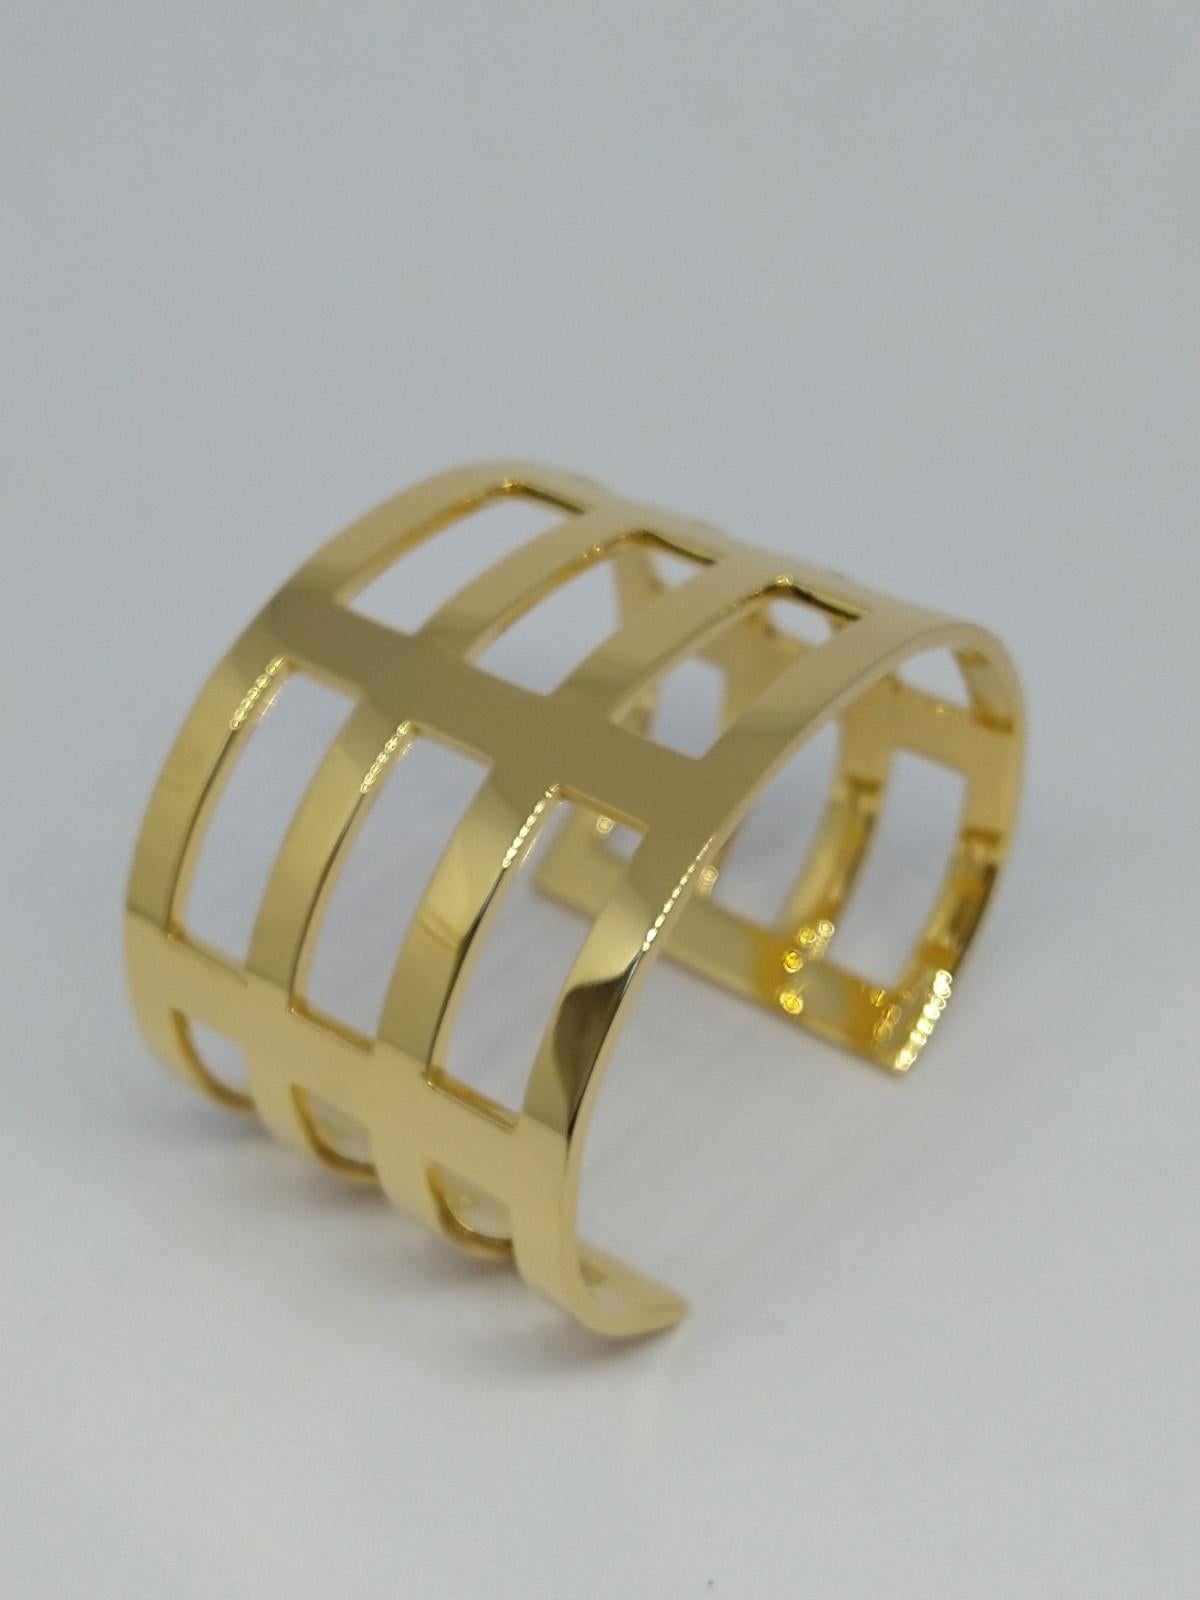 Tiffany designer, Thomas Kurilla designed this after selling original designs to Tiffany's. This wide 18 Karat  Yellow Gold Plated Cuff Bracelet 1 5/8 inch wide and 1.75 mm  thick with fifteen rectangle openings. From my graphic, sculptural, and